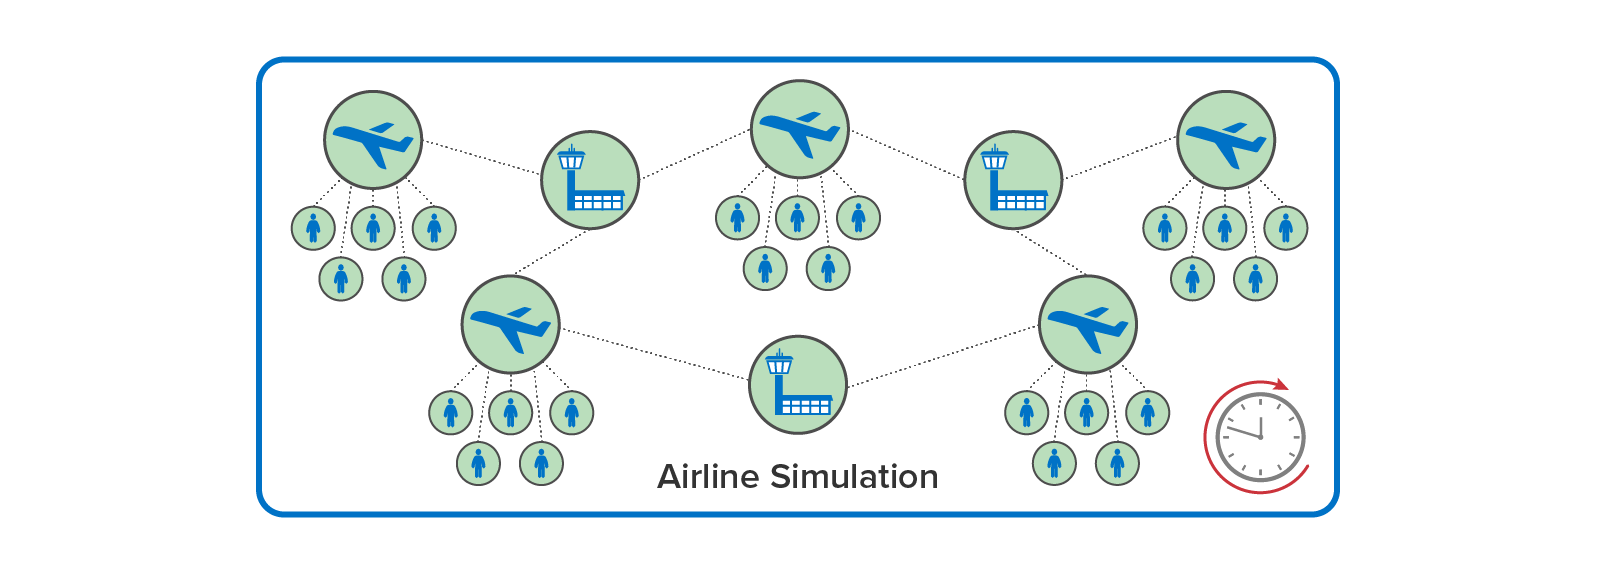 Example of using digital twins to implement aircraft, airports, and passengers in an airline simulation.